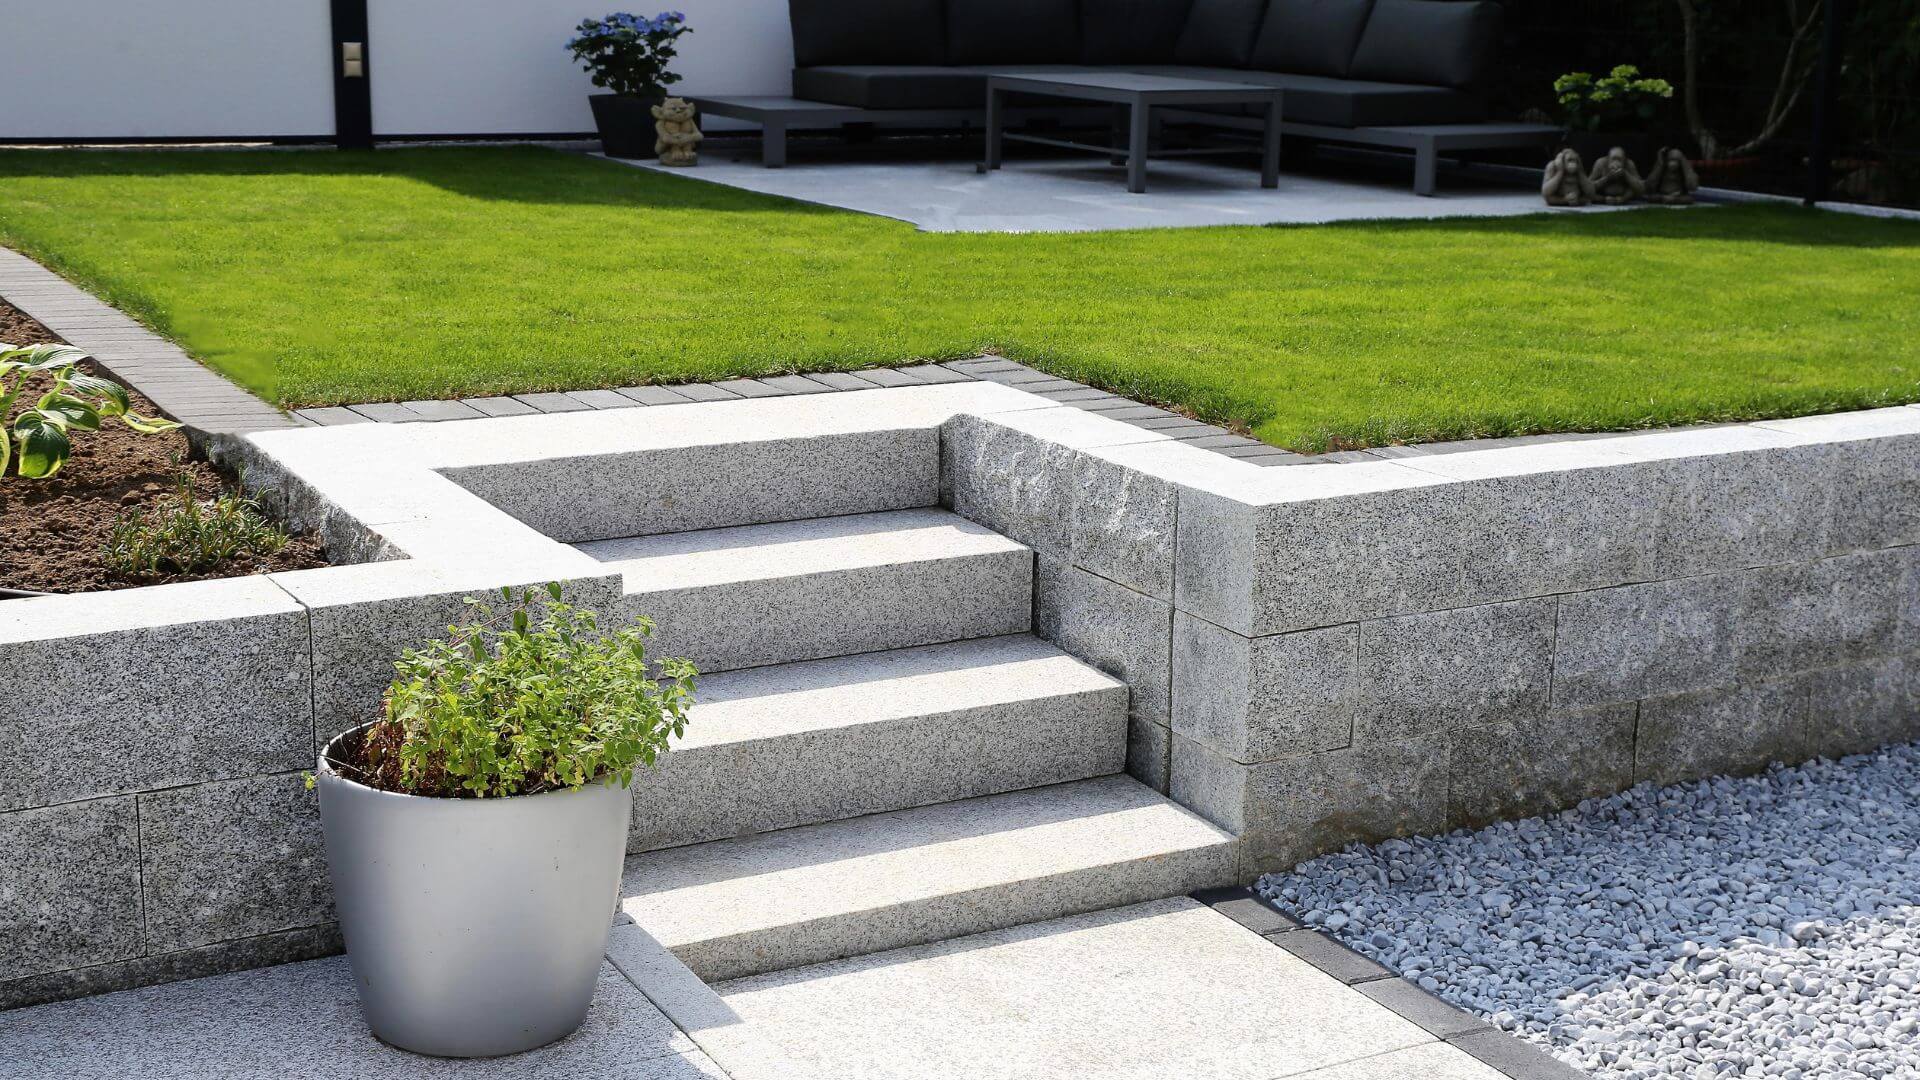 A meticulously presented outdoor space featuring pristine white steps leading up to a well-manicured lawn, bordered by a clean, modern grey retaining wall and white gravel. The polished appearance enhances the property's aesthetic, suggesting a high level of care that significantly boosts rental appeal.